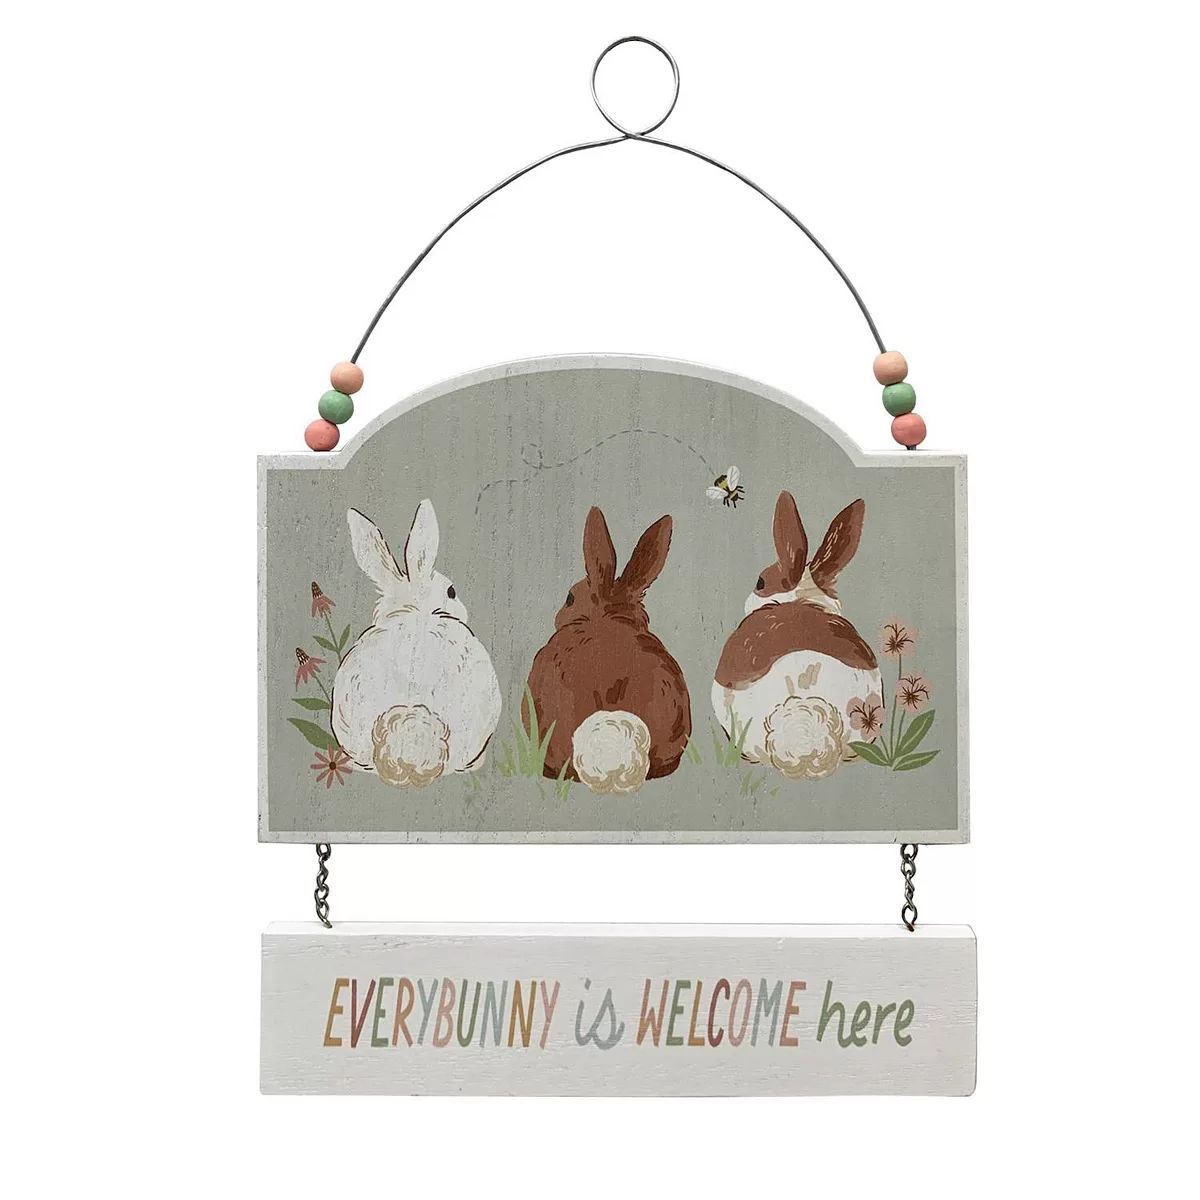 Celebrate Together™ Easter "Everybunny is Welcome Here" Wall Decor | Kohl's